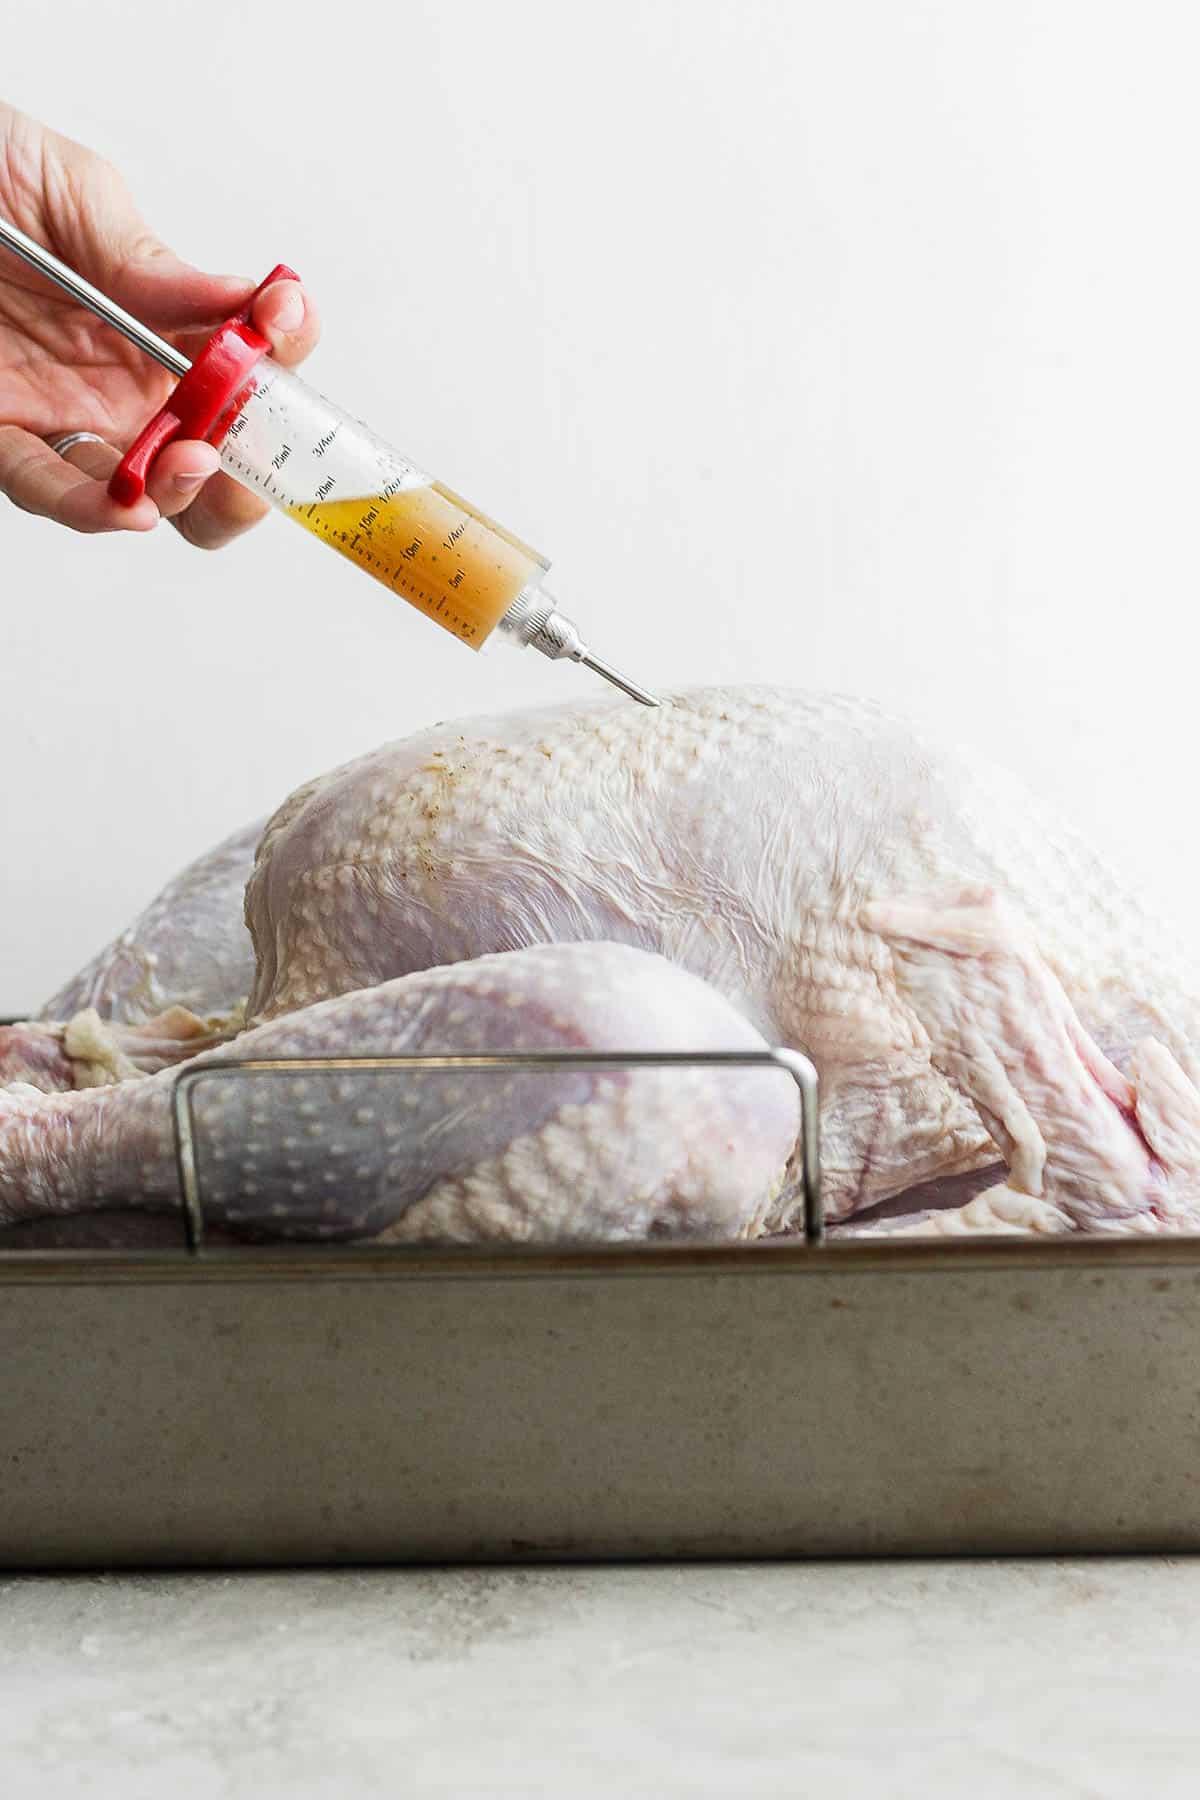 A turkey breast being injected with the melted butter mixture.